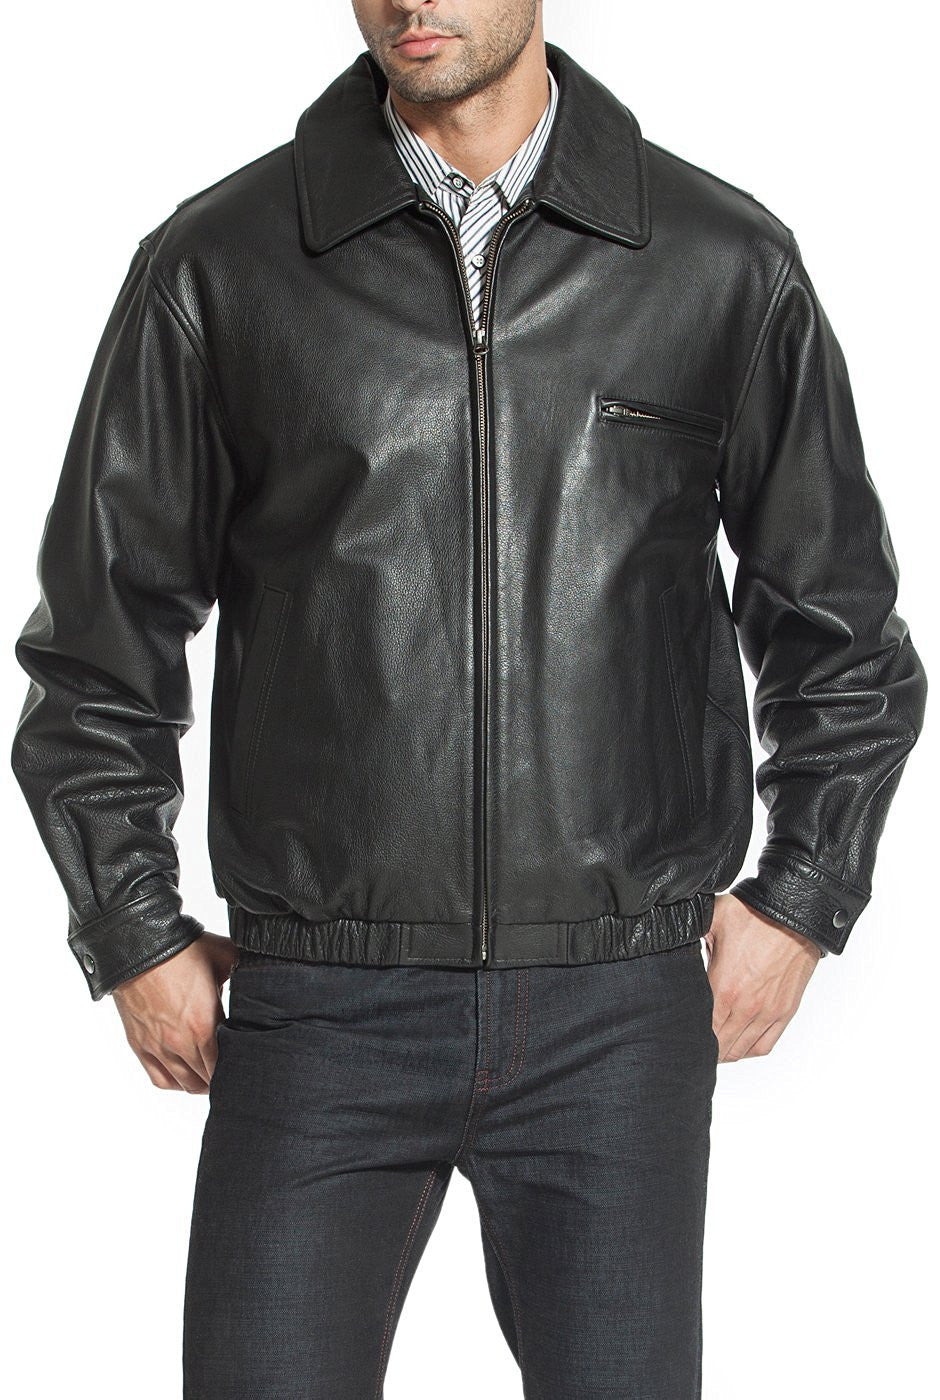 BGSD Men Aaron Classic Cowhide Leather Bomber Jacket